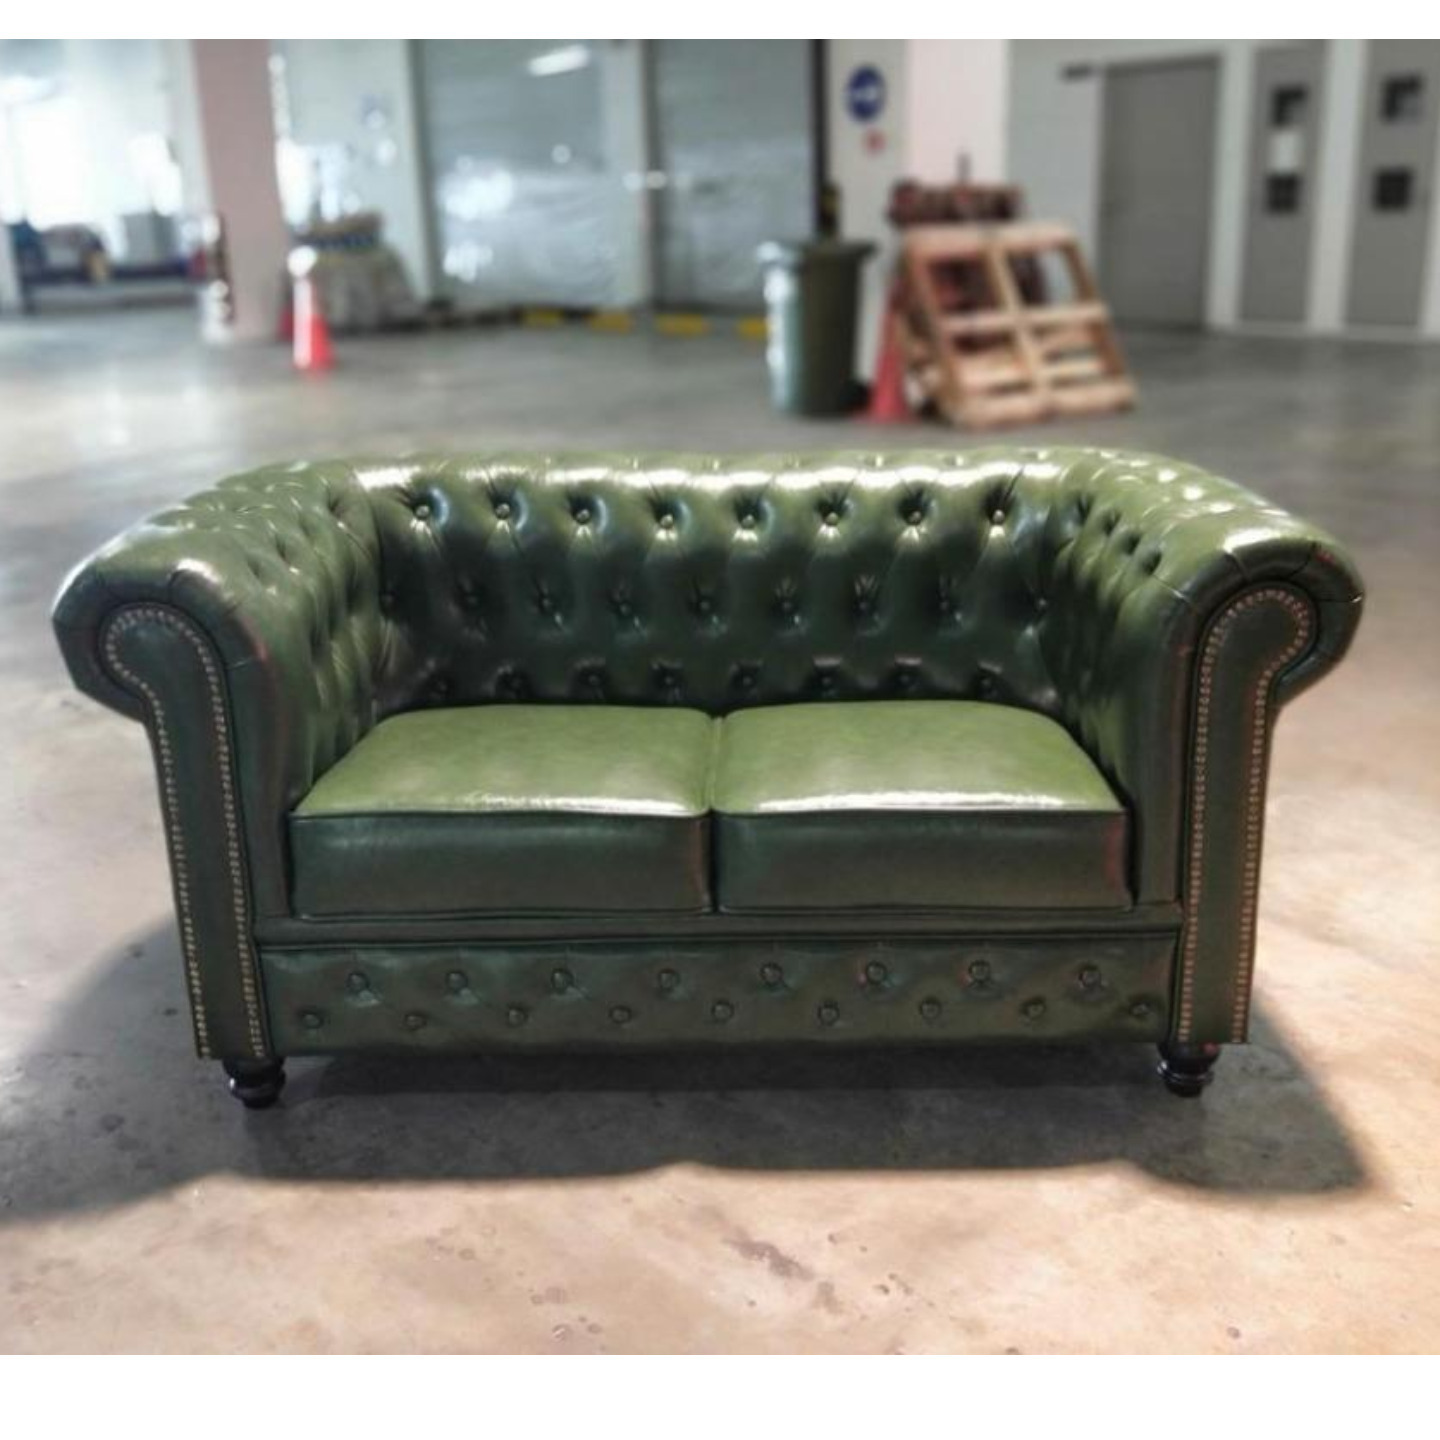 PRE-ORDER SALVADORE X 2 Seater Chesterfield Sofa in EMERALD GREEN - Estimated Delivery in Mid August 2021